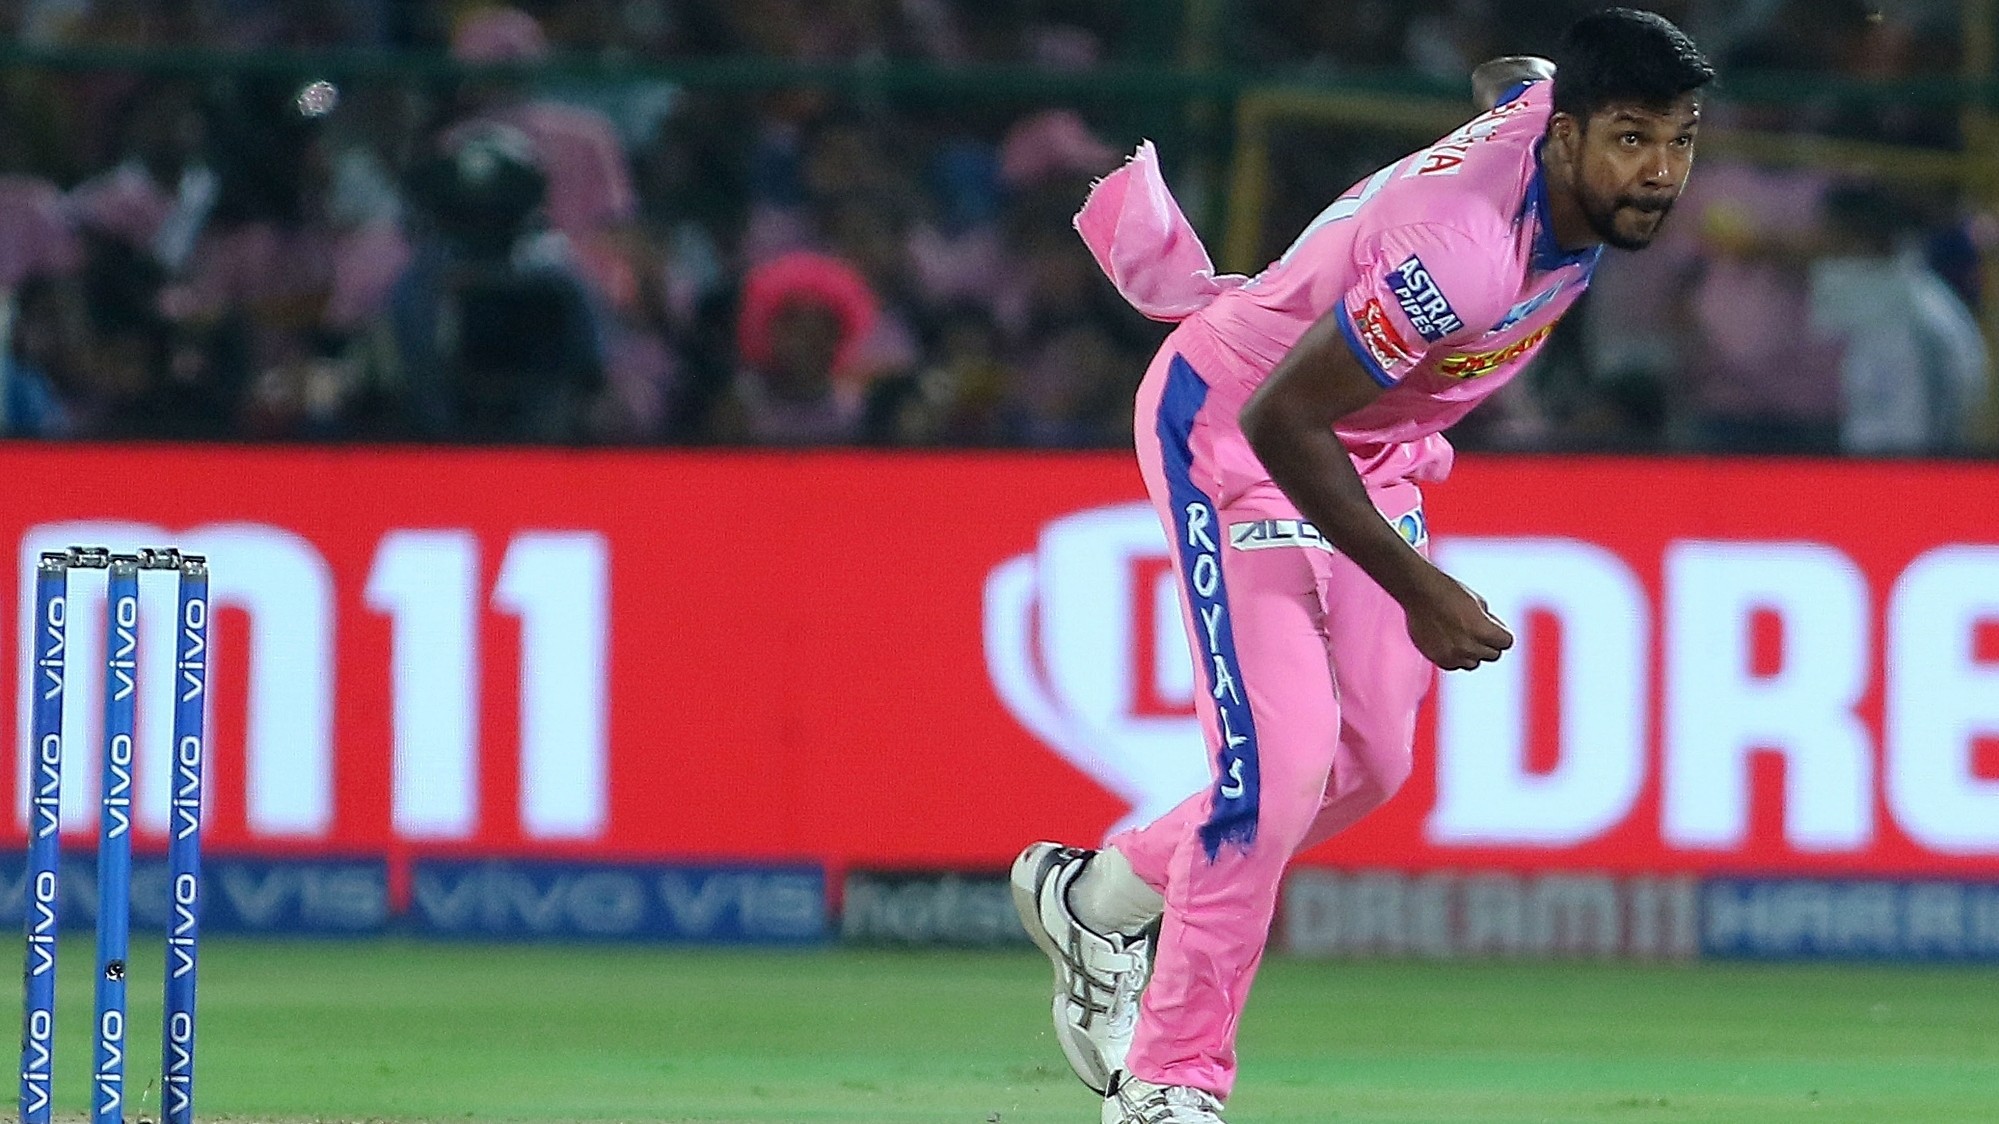 ‘I got him bowled and it was middle-stump’, Varun Aaron shares his favourite IPL memory